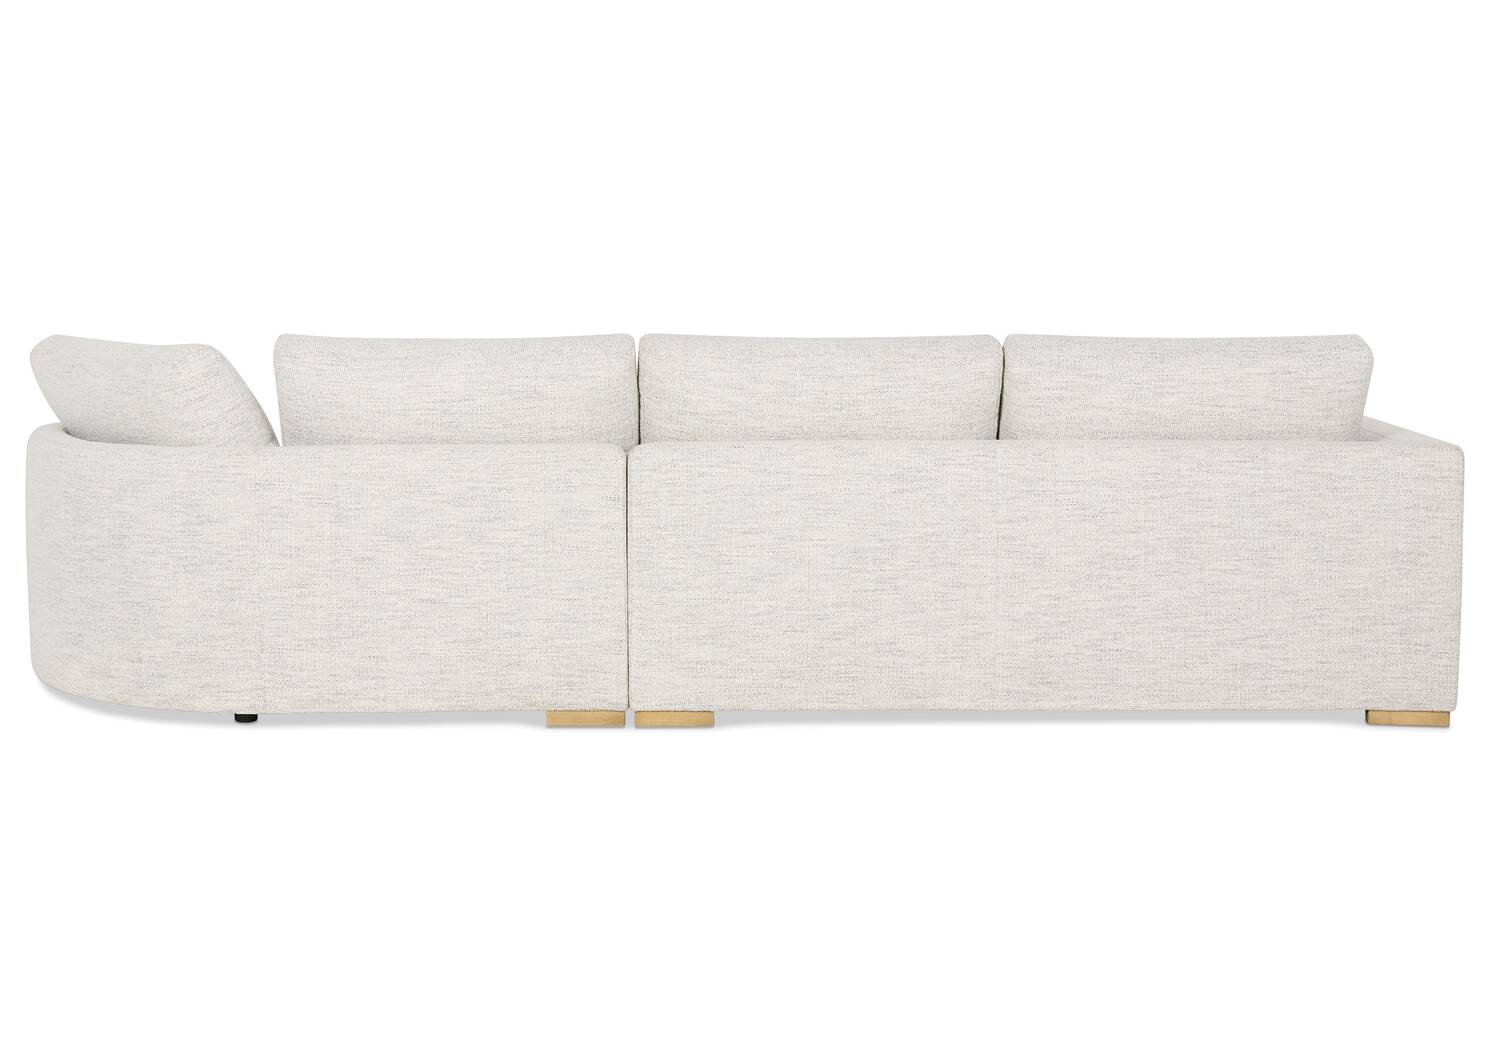 Anderson Sofa Chaise -Luly Pepper, RCF